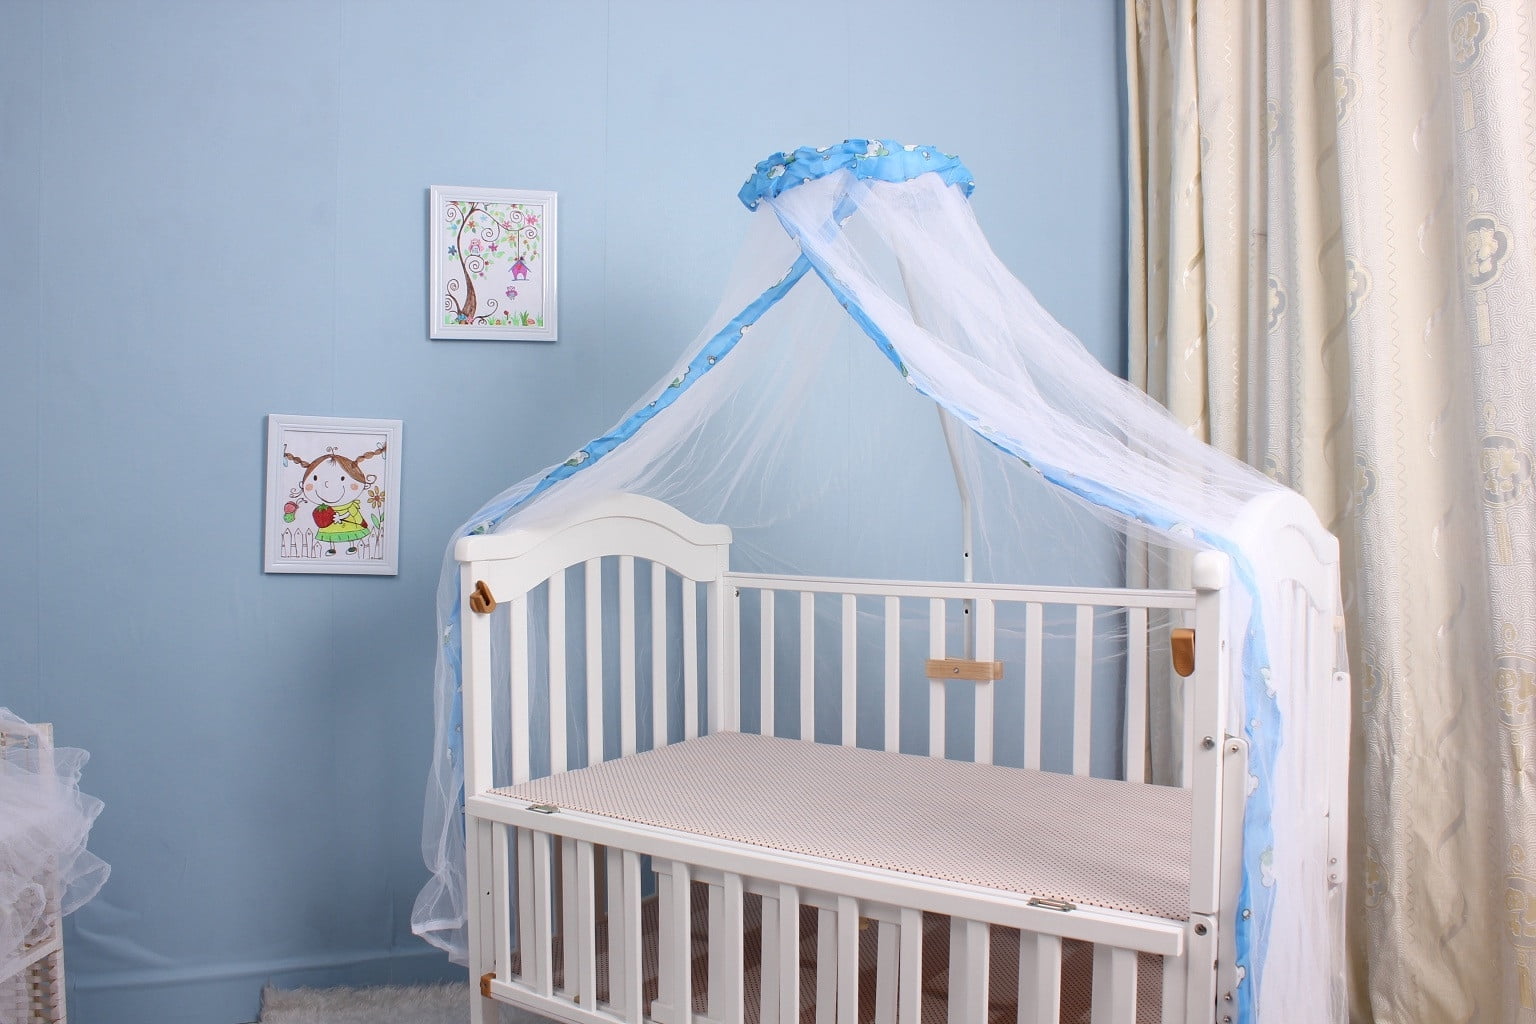 Baby Bed Mosquito Mesh Dome Curtain Net for Toddler Crib Beding Cot Canopy Cover 